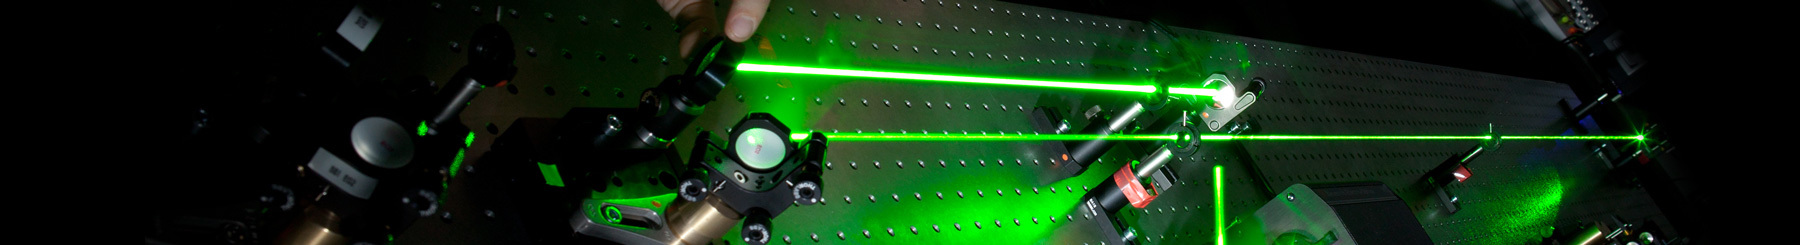 Advanced laser technology and precision optics in use at a tech university.